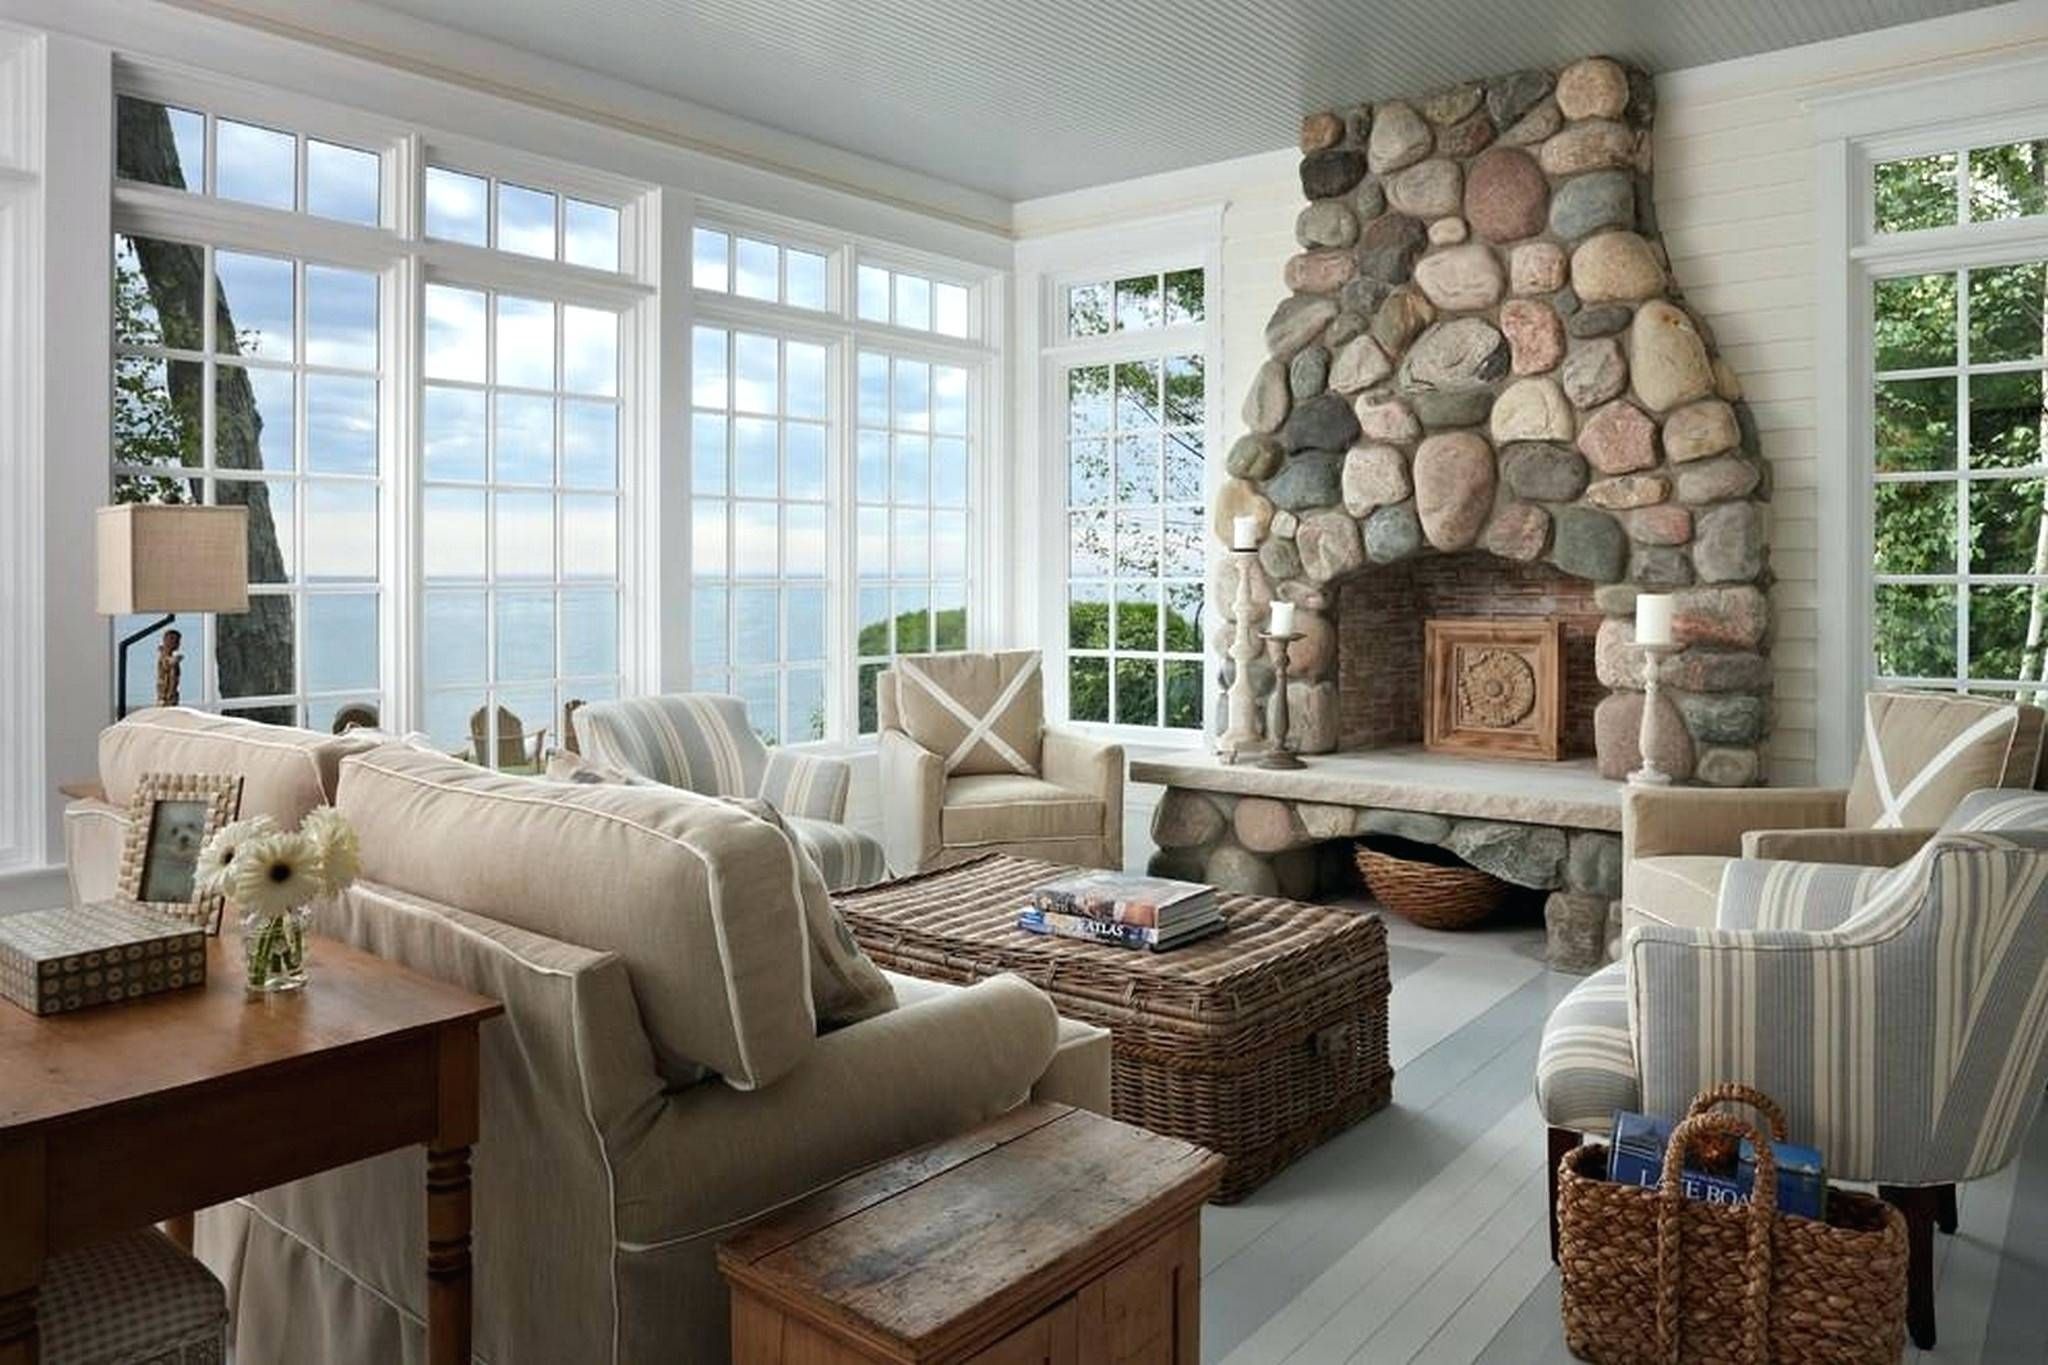 Decorations : Beach Cabin Interior Design Beach Cabin Decorating Within Most Recent Beach Cottage Wall Decors (Gallery 20 of 25)